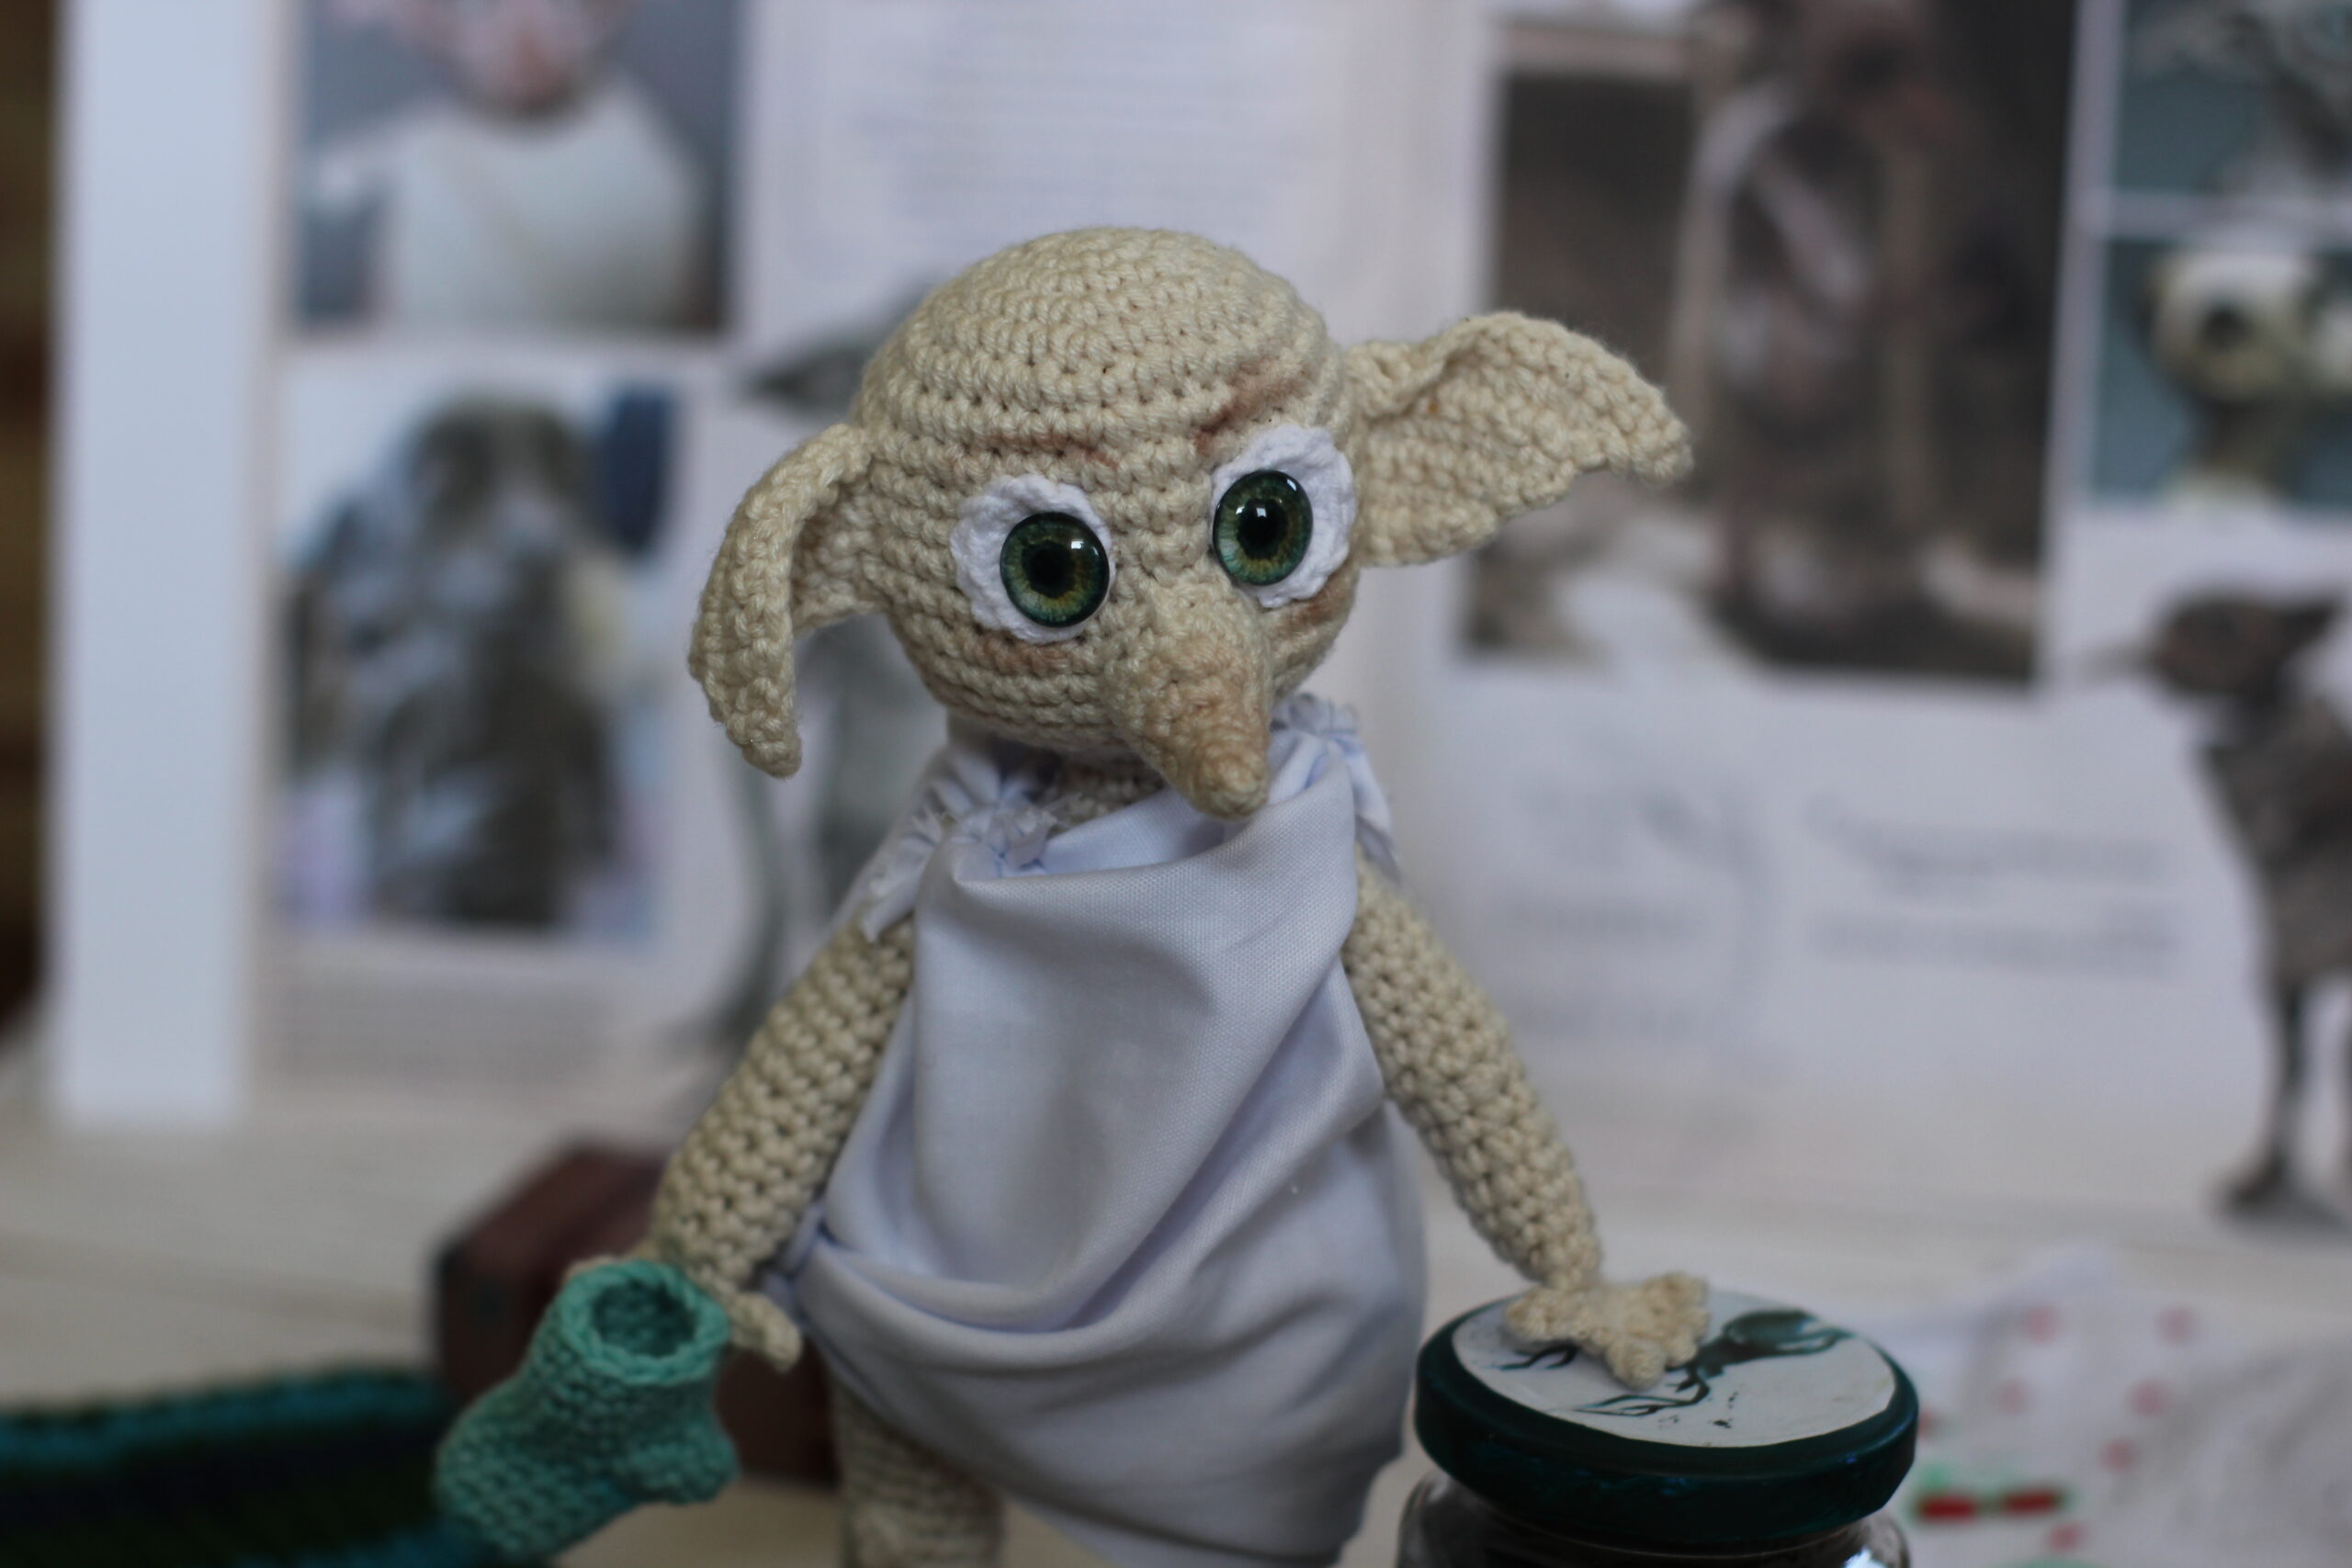 YARN, or Dobby from Harry Potter?